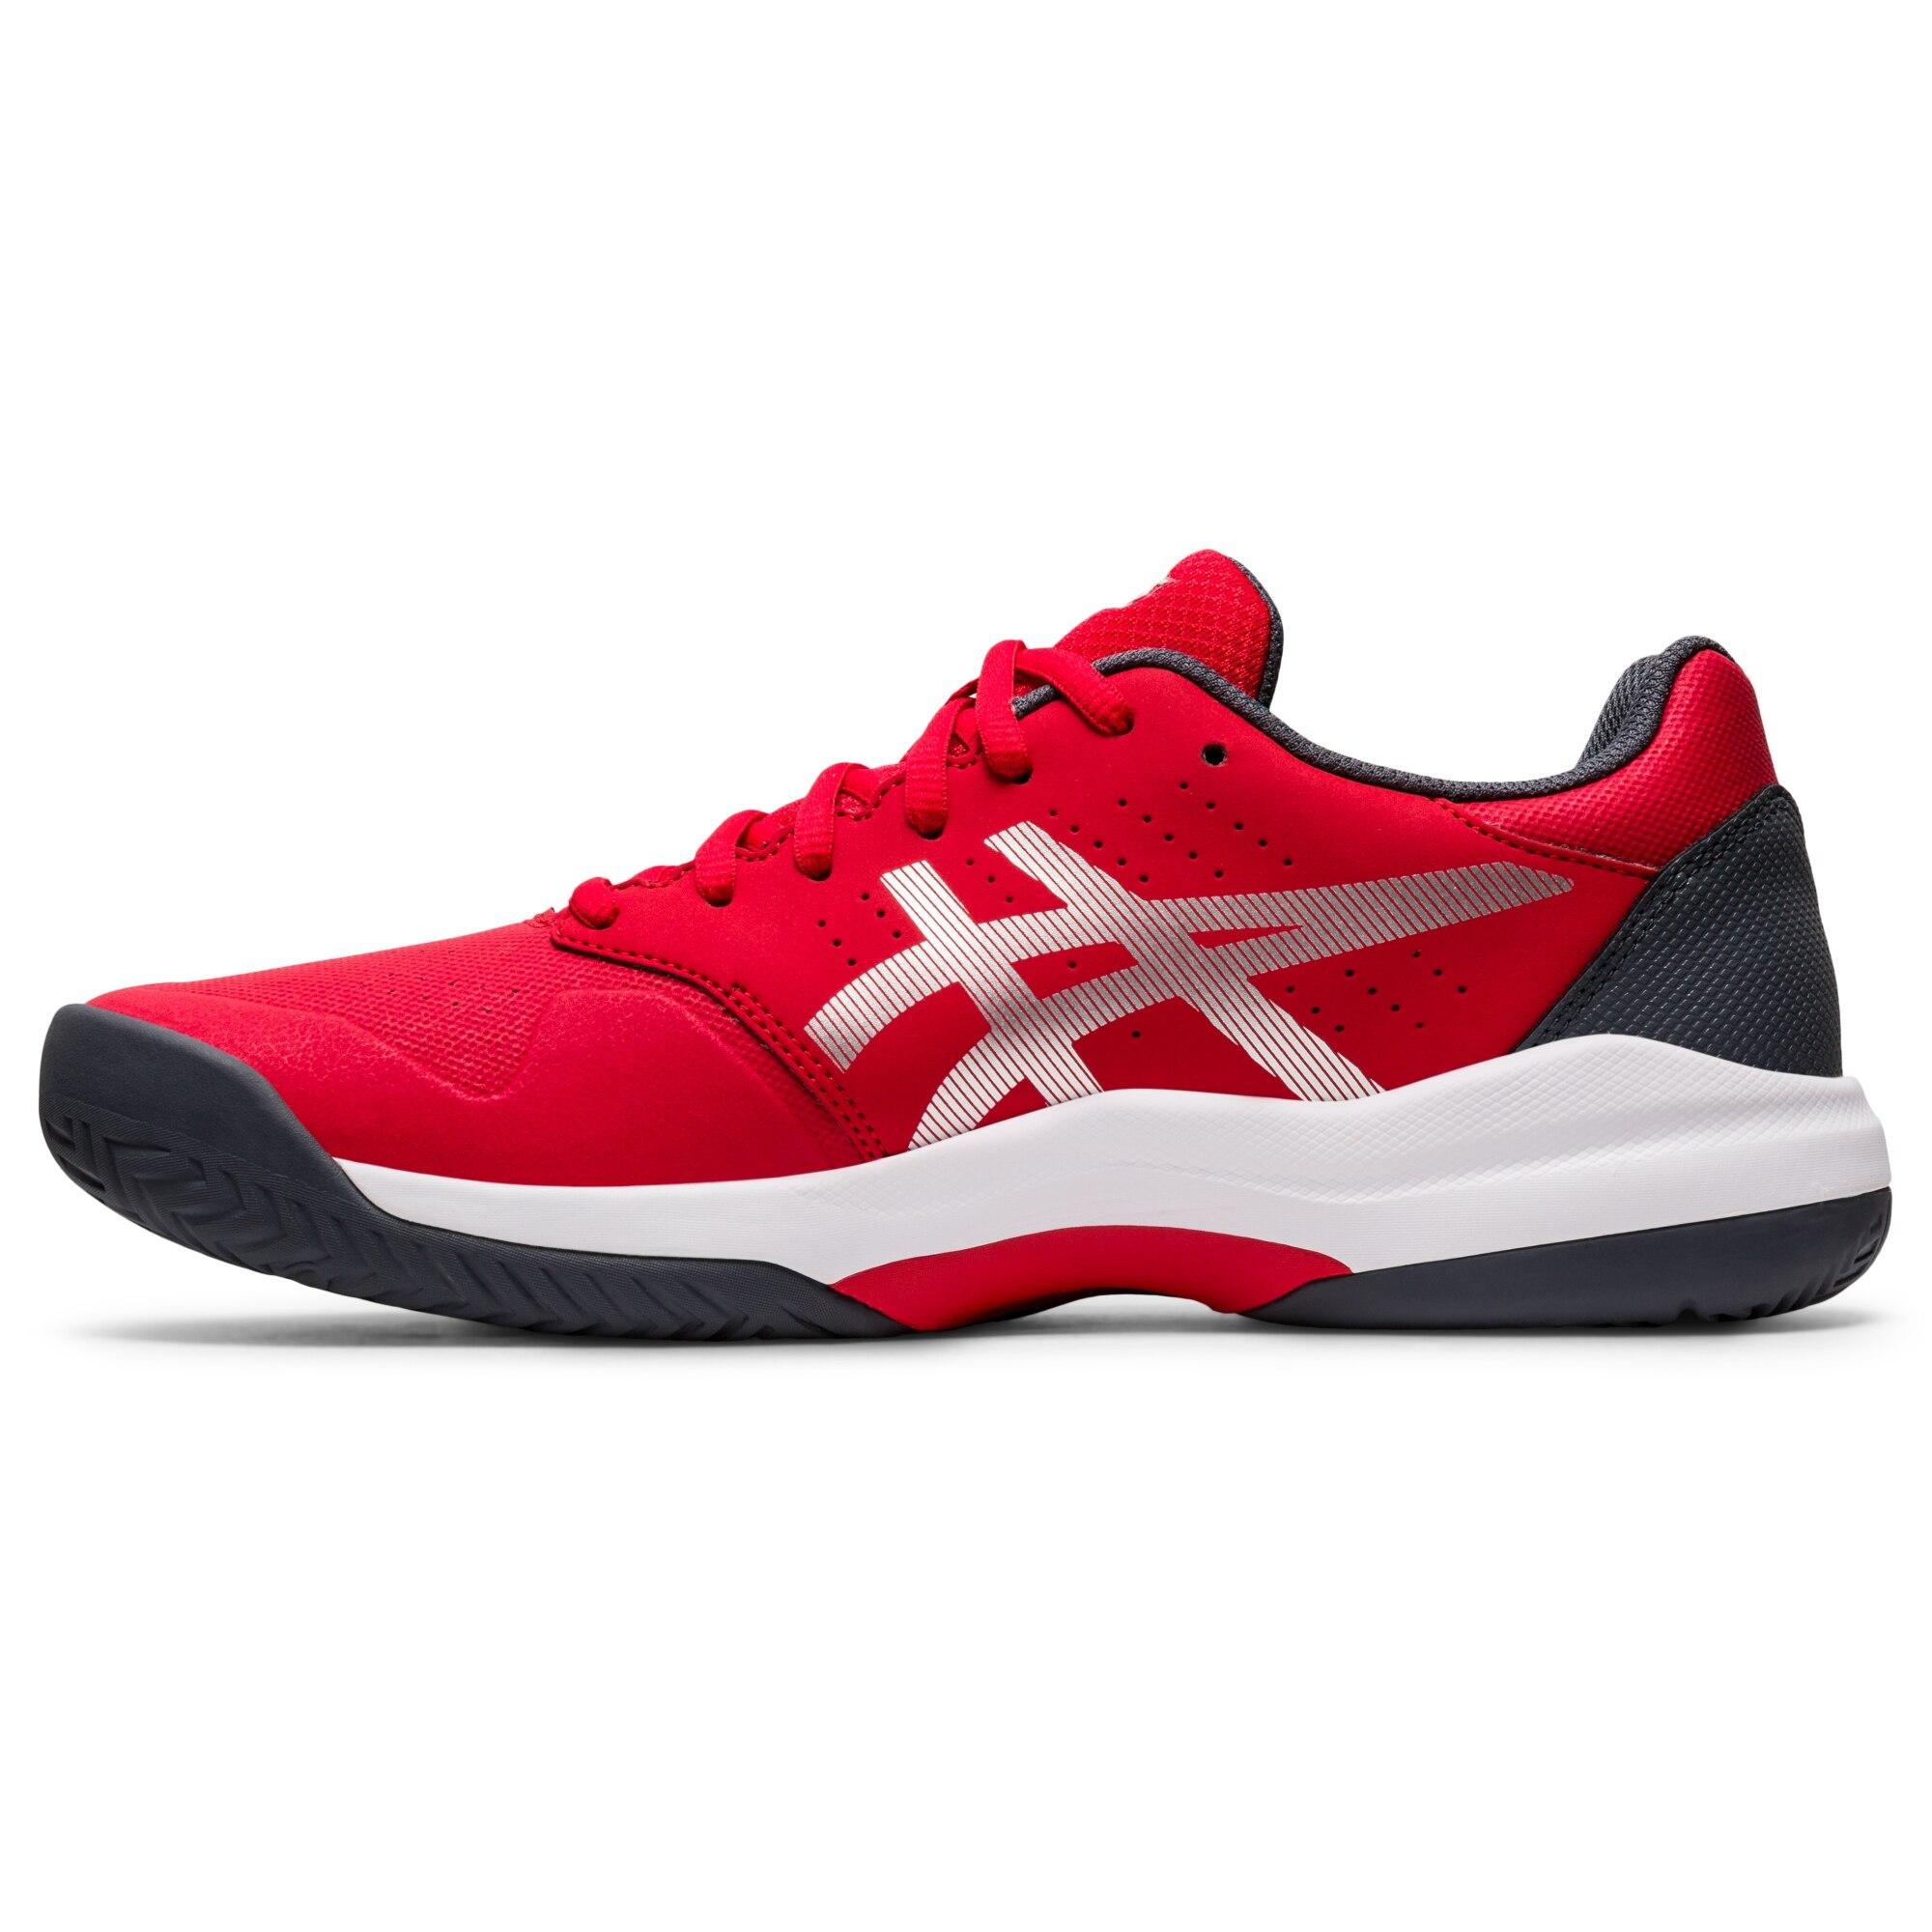 Asics Mens GEL-Game 7 Tennis Shoes - Classic Red/Pure Silver - www.bagssaleusa.com